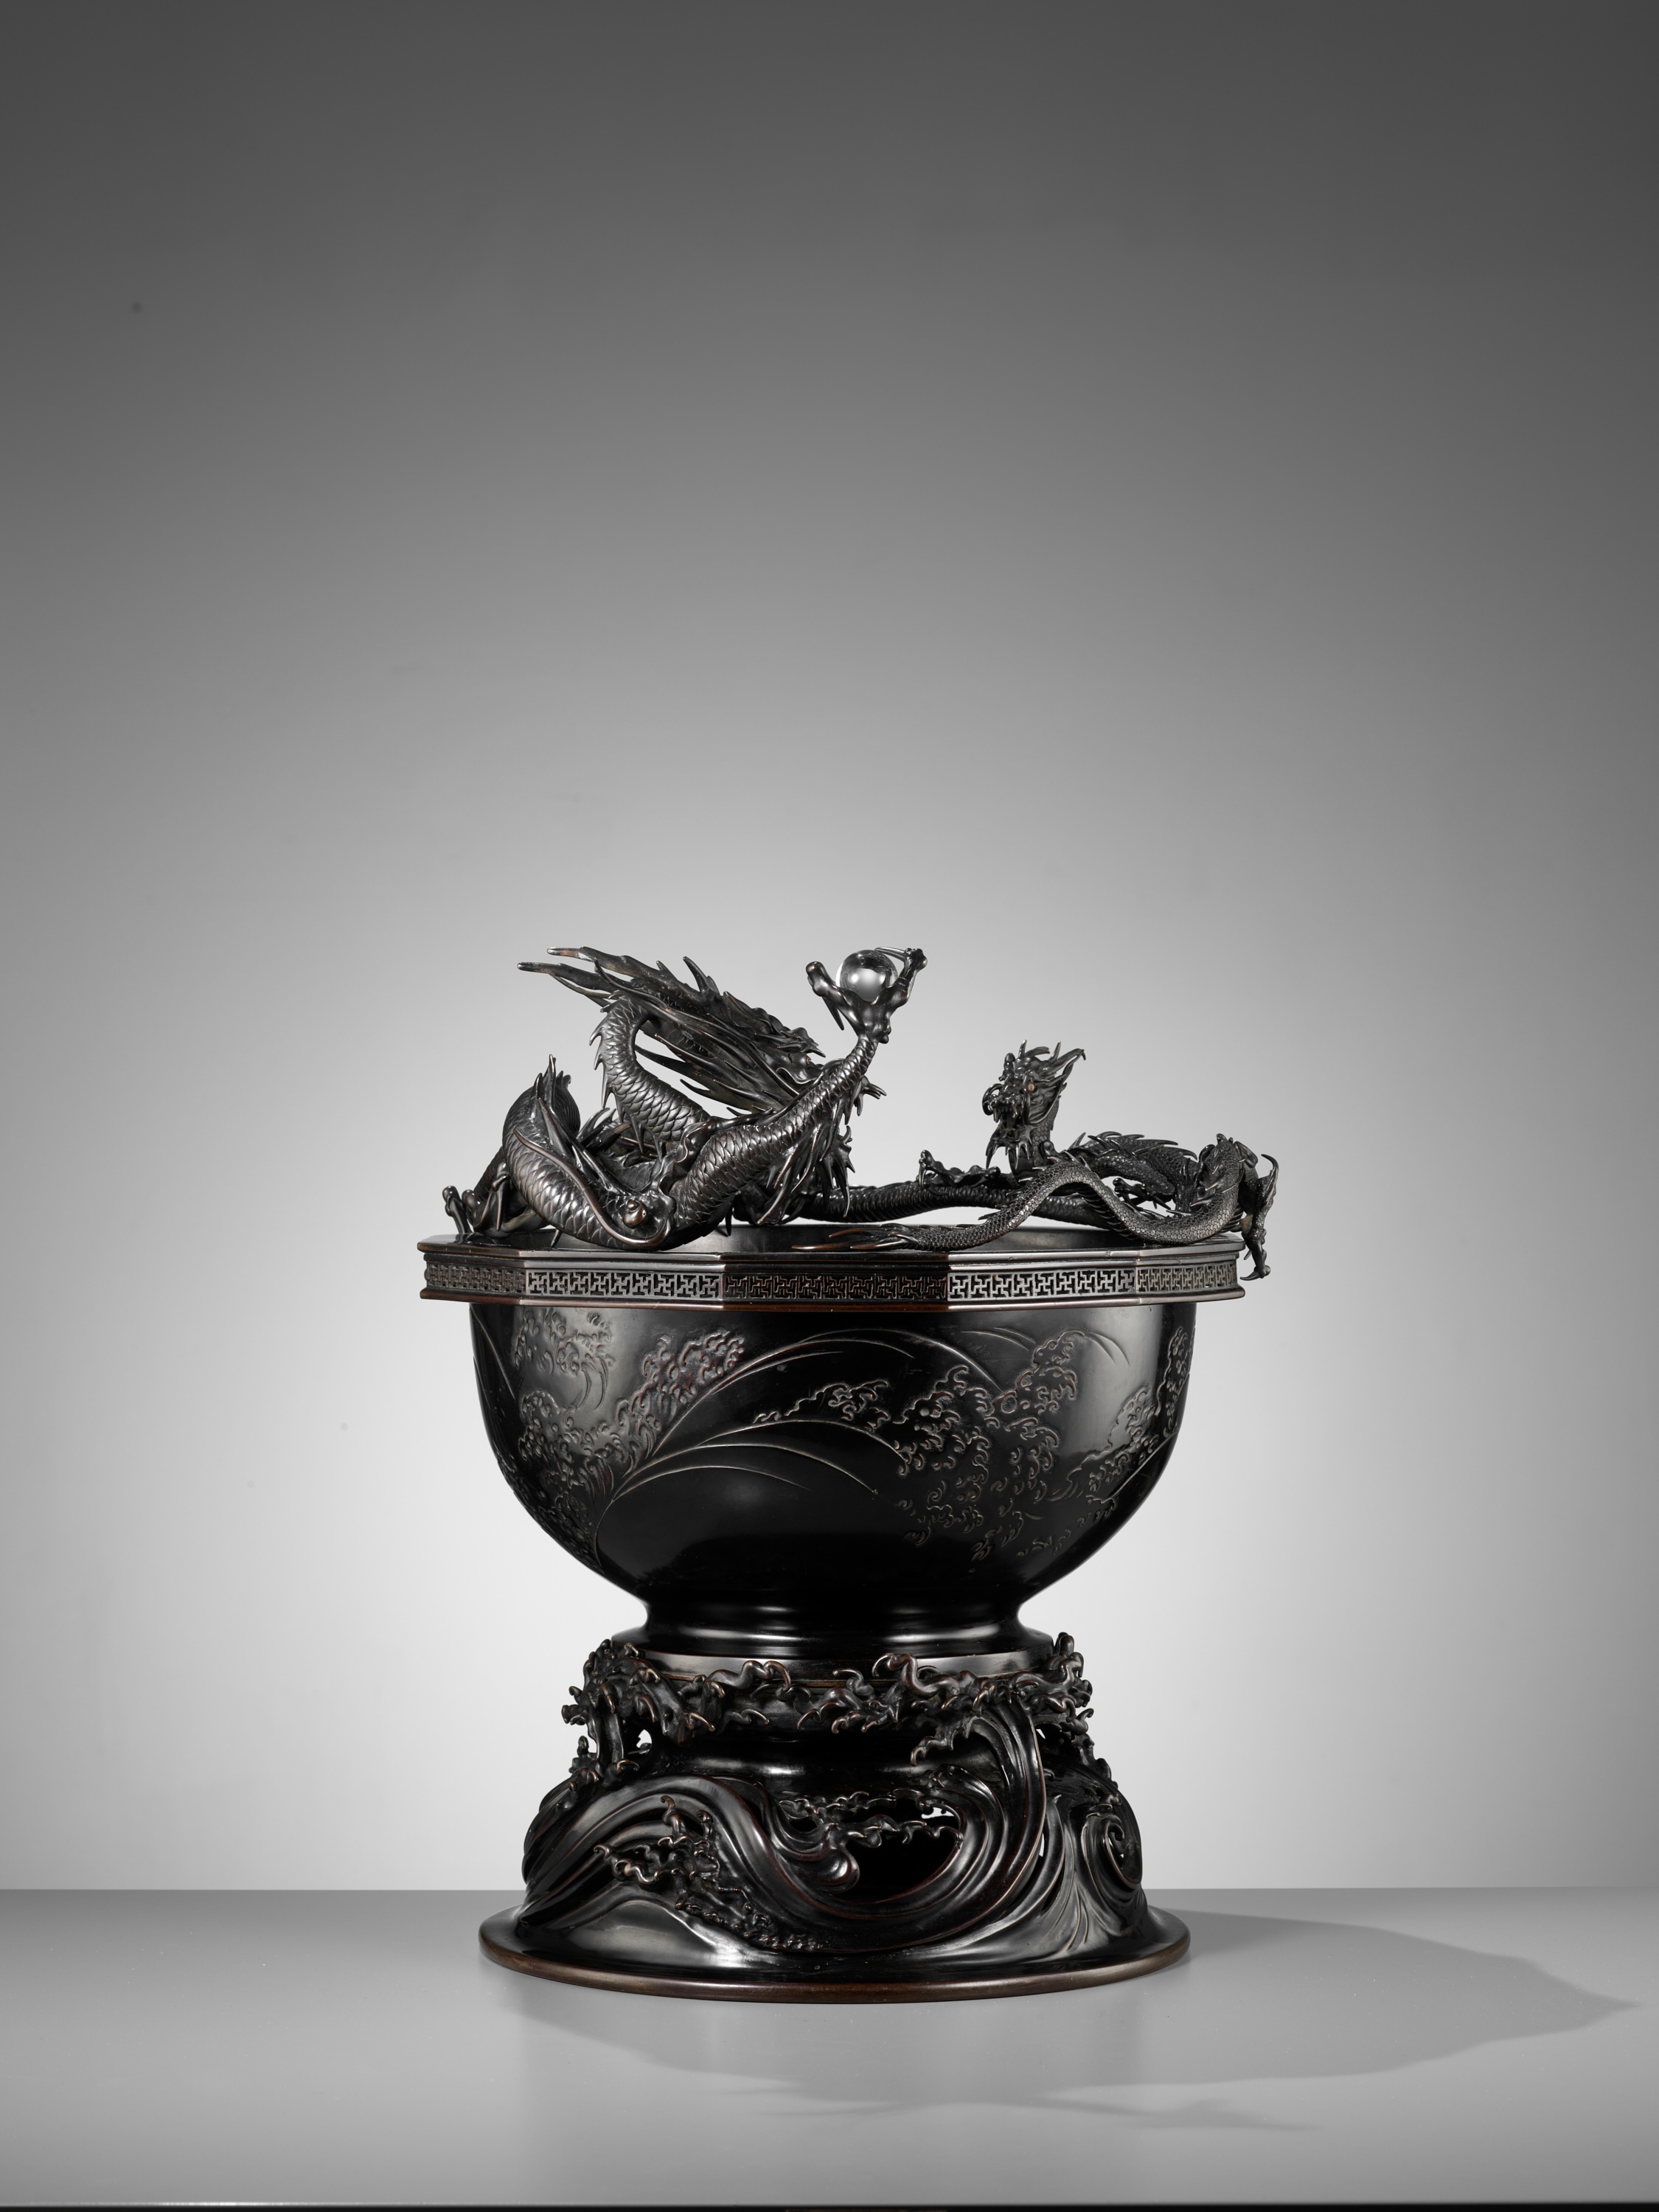 HIDEMITSU: A LARGE AND IMPRESSIVE BRONZE BOWL WITH TWO DRAGONS - Image 11 of 16